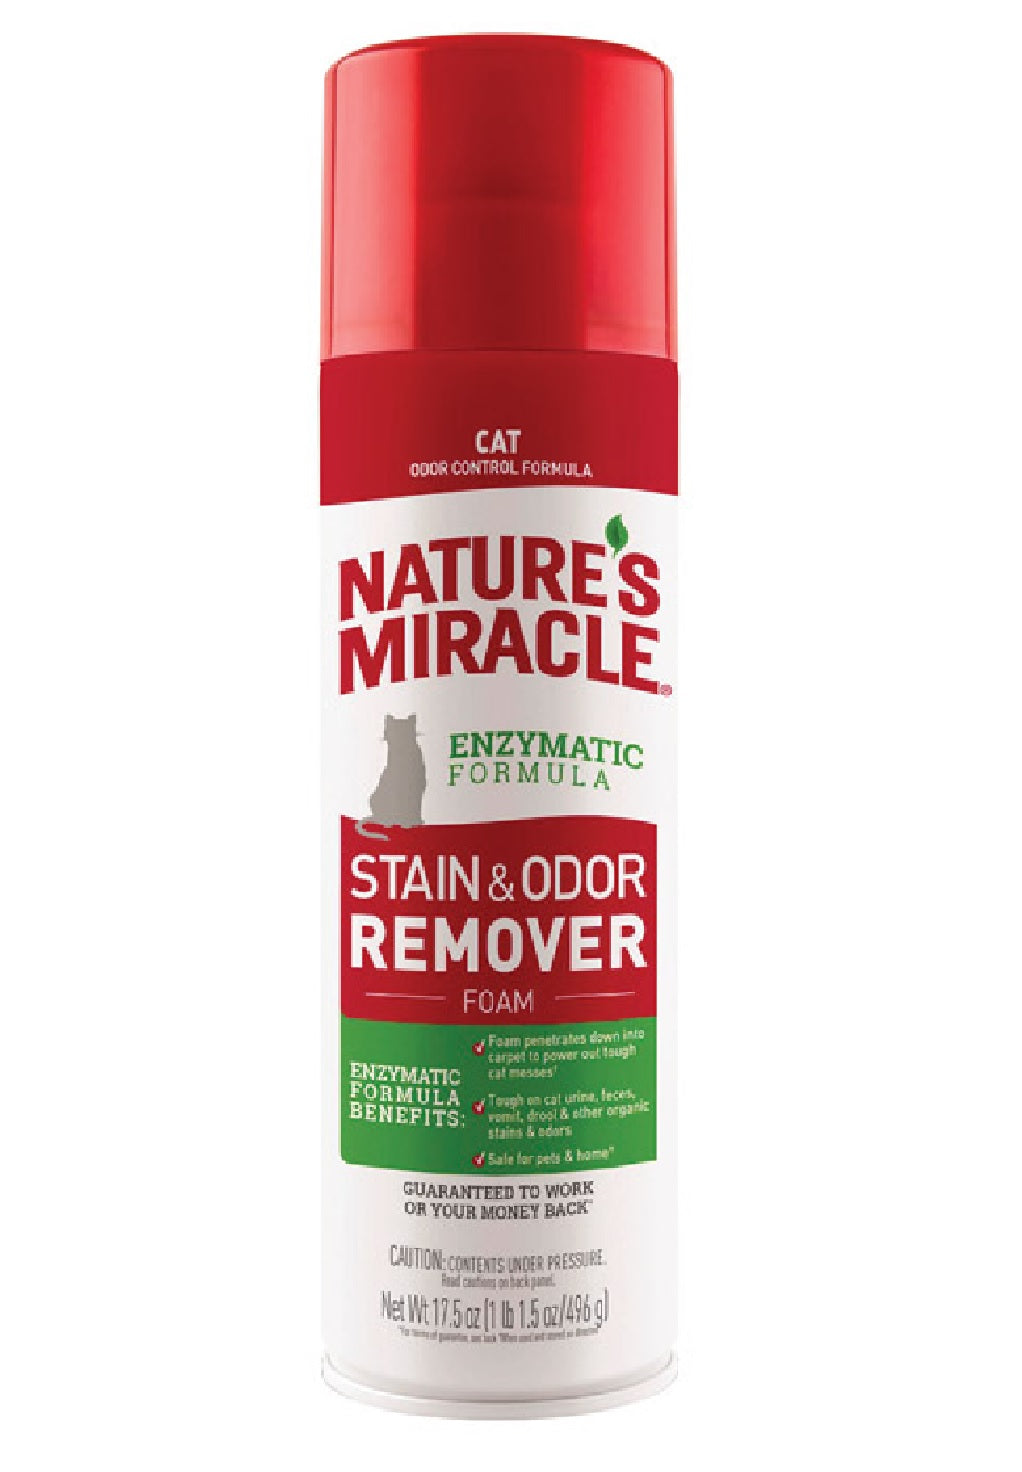 Natrue's Miracle P-68341 Cat Odor & Stain Remover, 17.5 Oucne